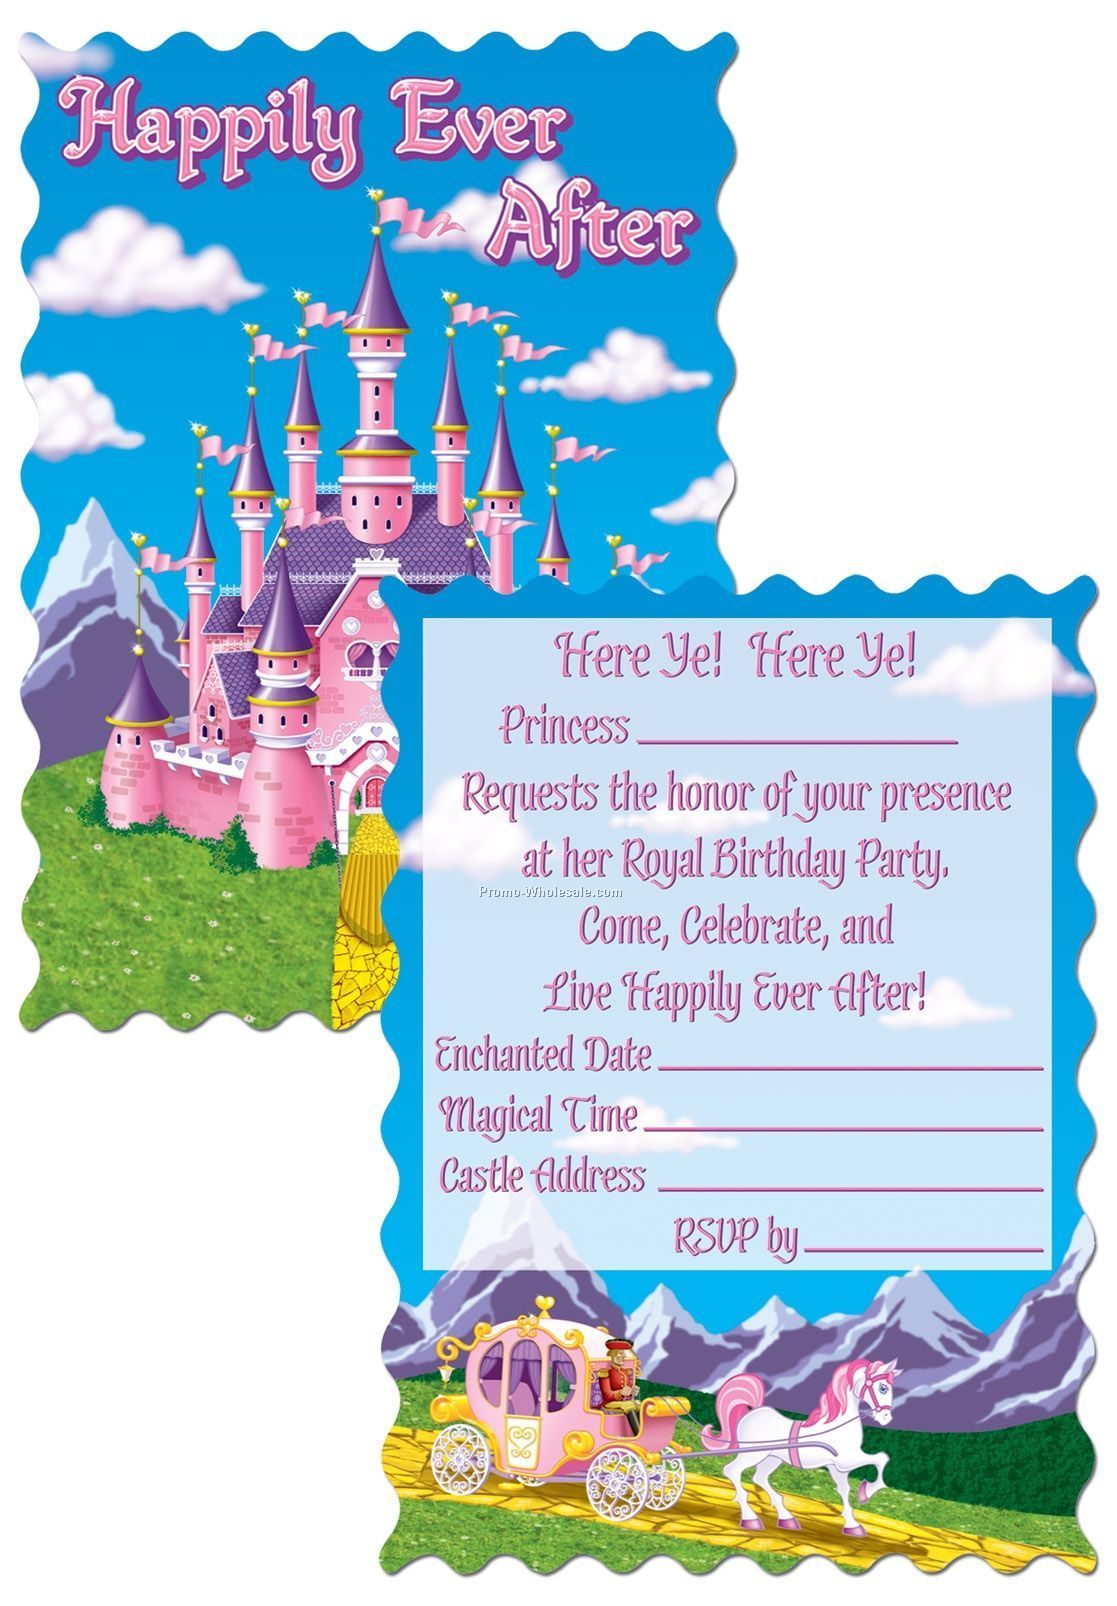 4"x5-1/2" Princess Happily Ever After Party Invitations